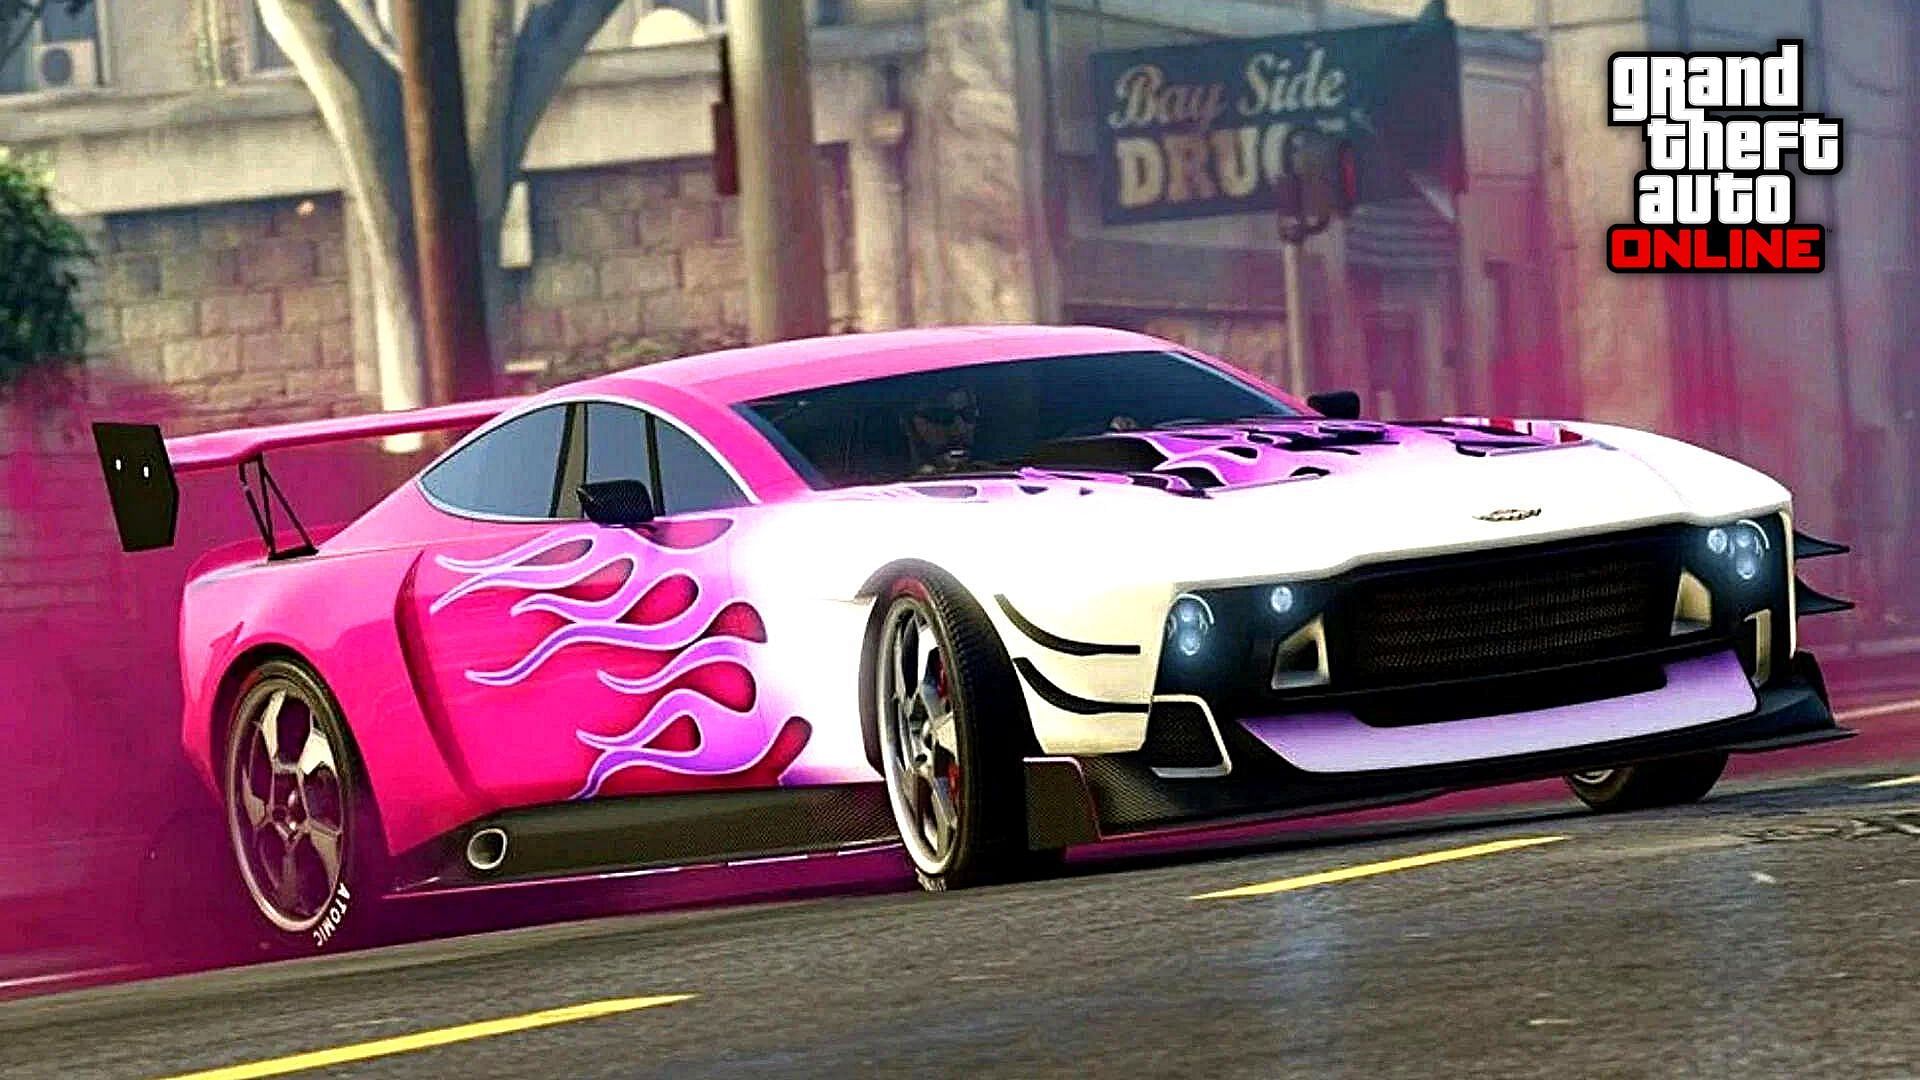 A complete list of all available GTA Online cars at Simeon